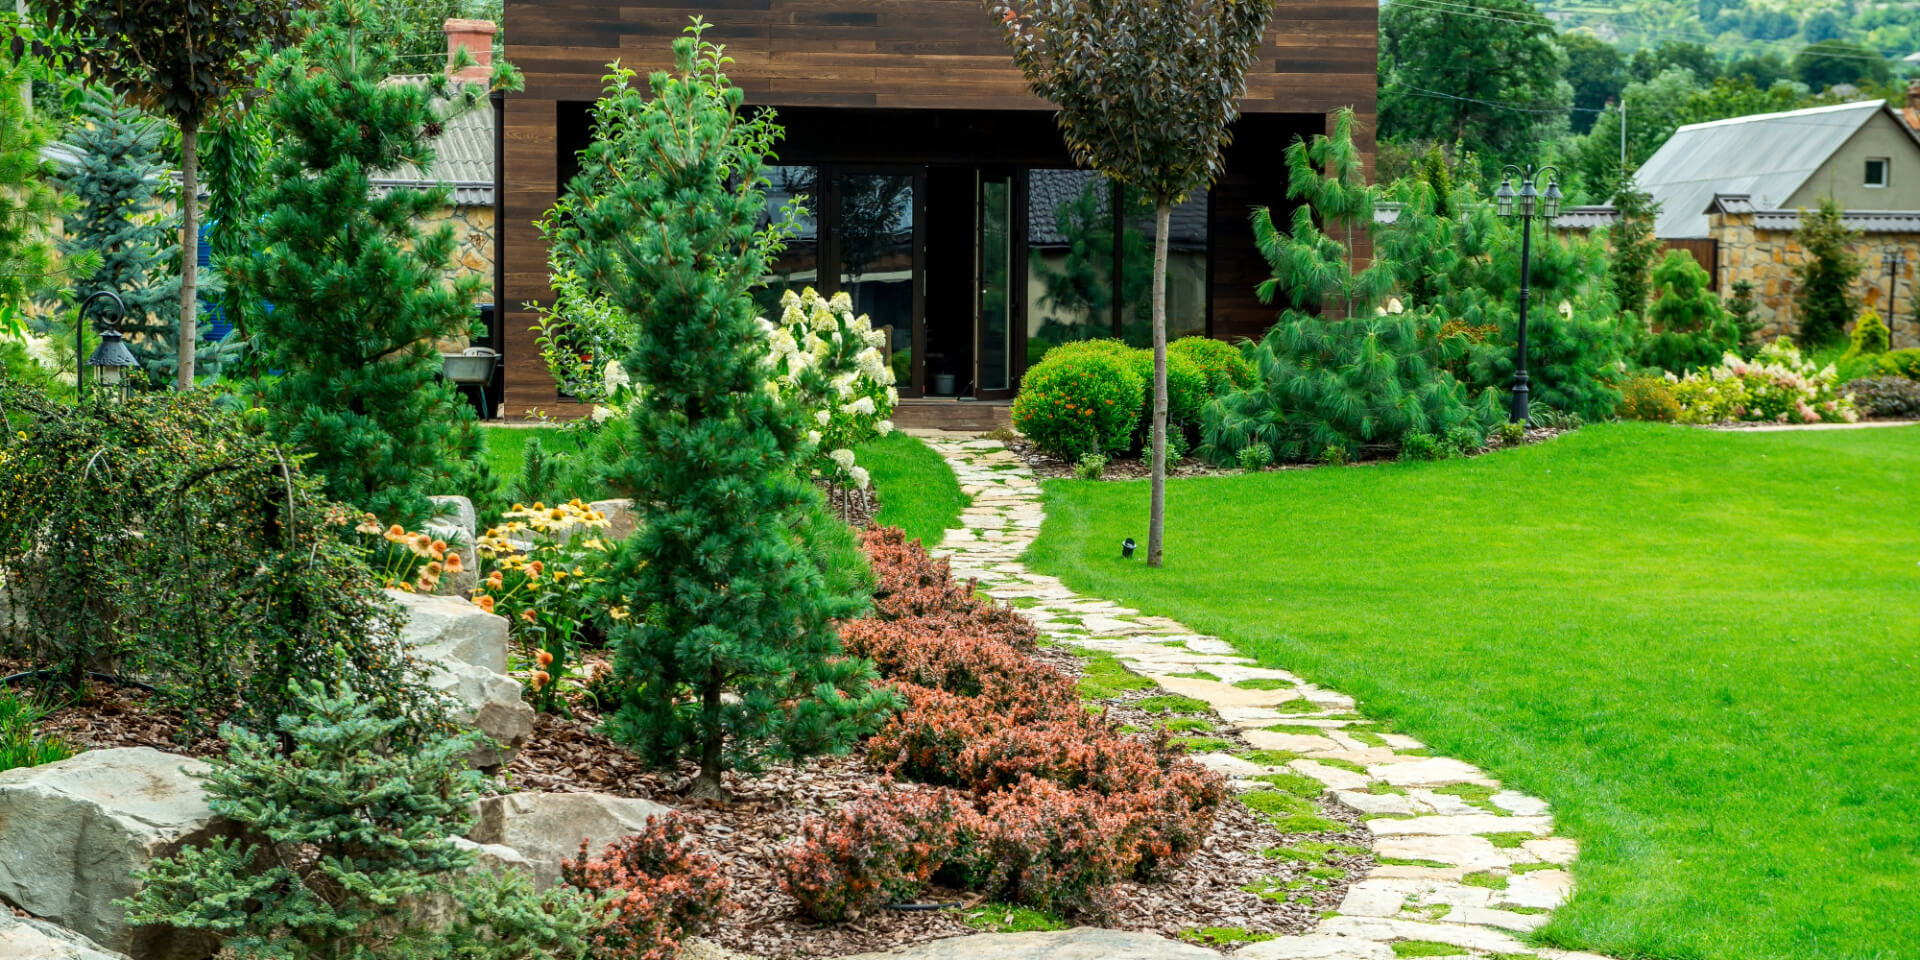 Budget-friendly Tips For Your Backyard Landscaping